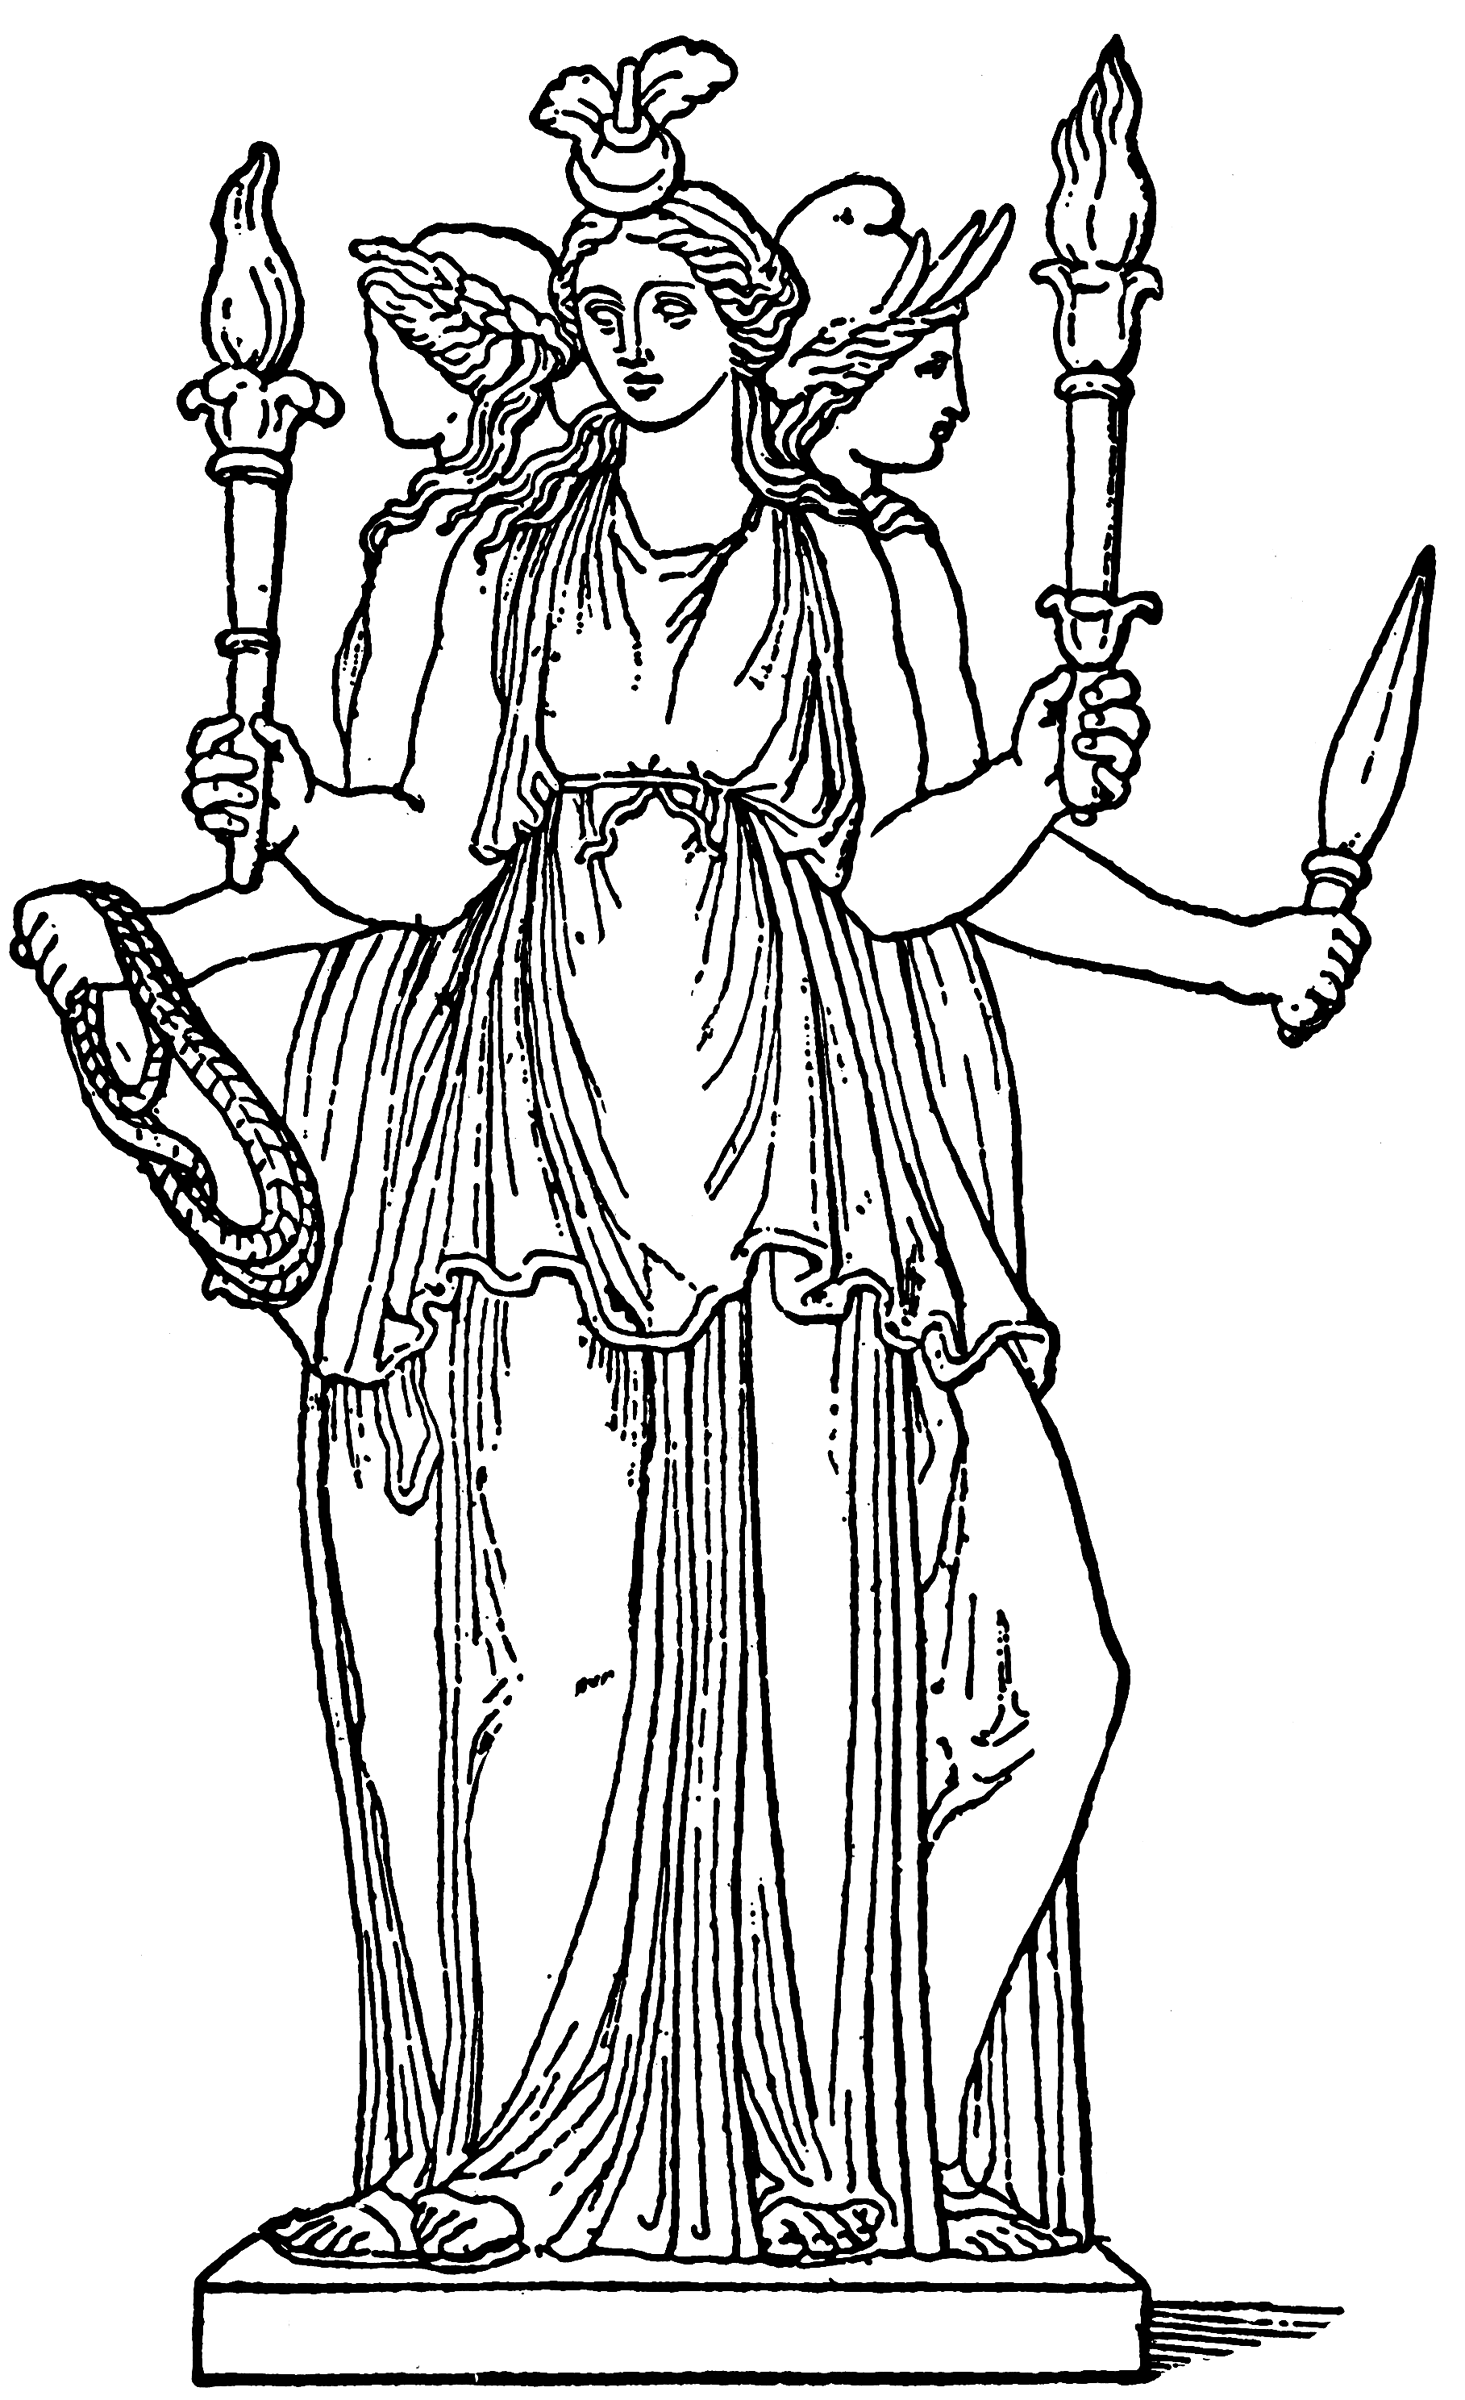 Hecate | ClipArt ETC